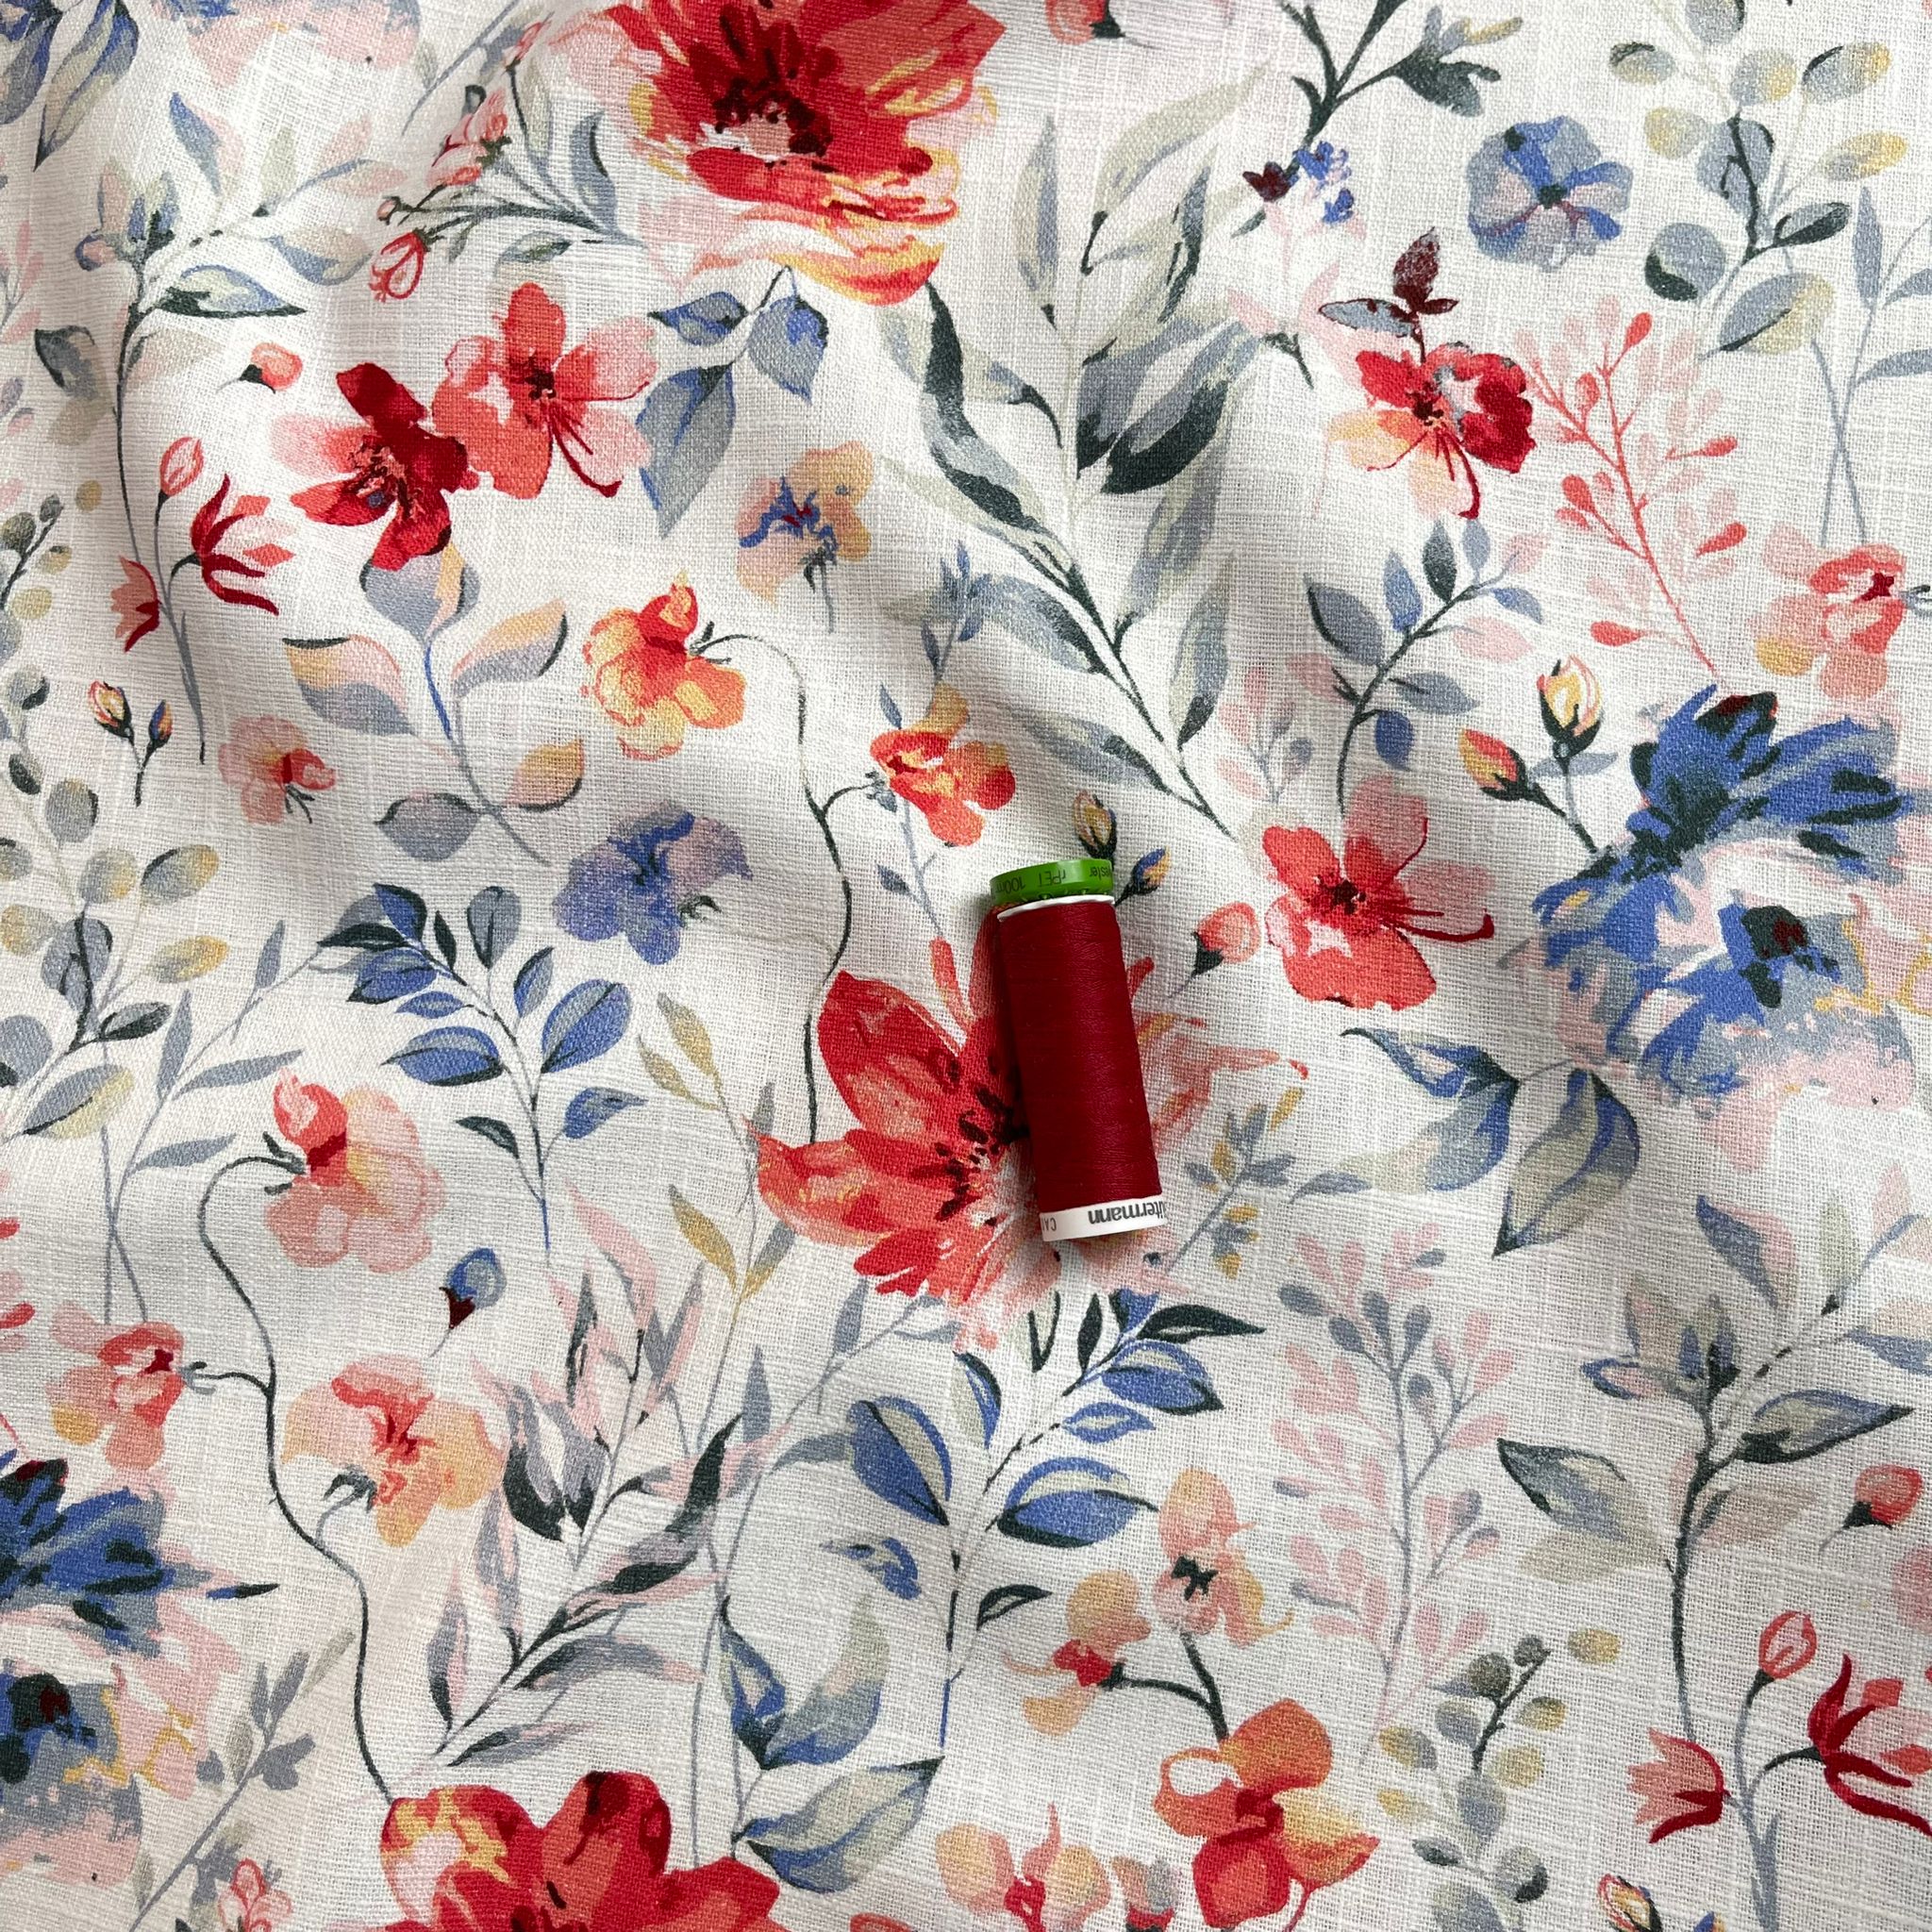 REMNANT 1.13 Metres - Red Flowers on White Linen Cotton Blend Fabric